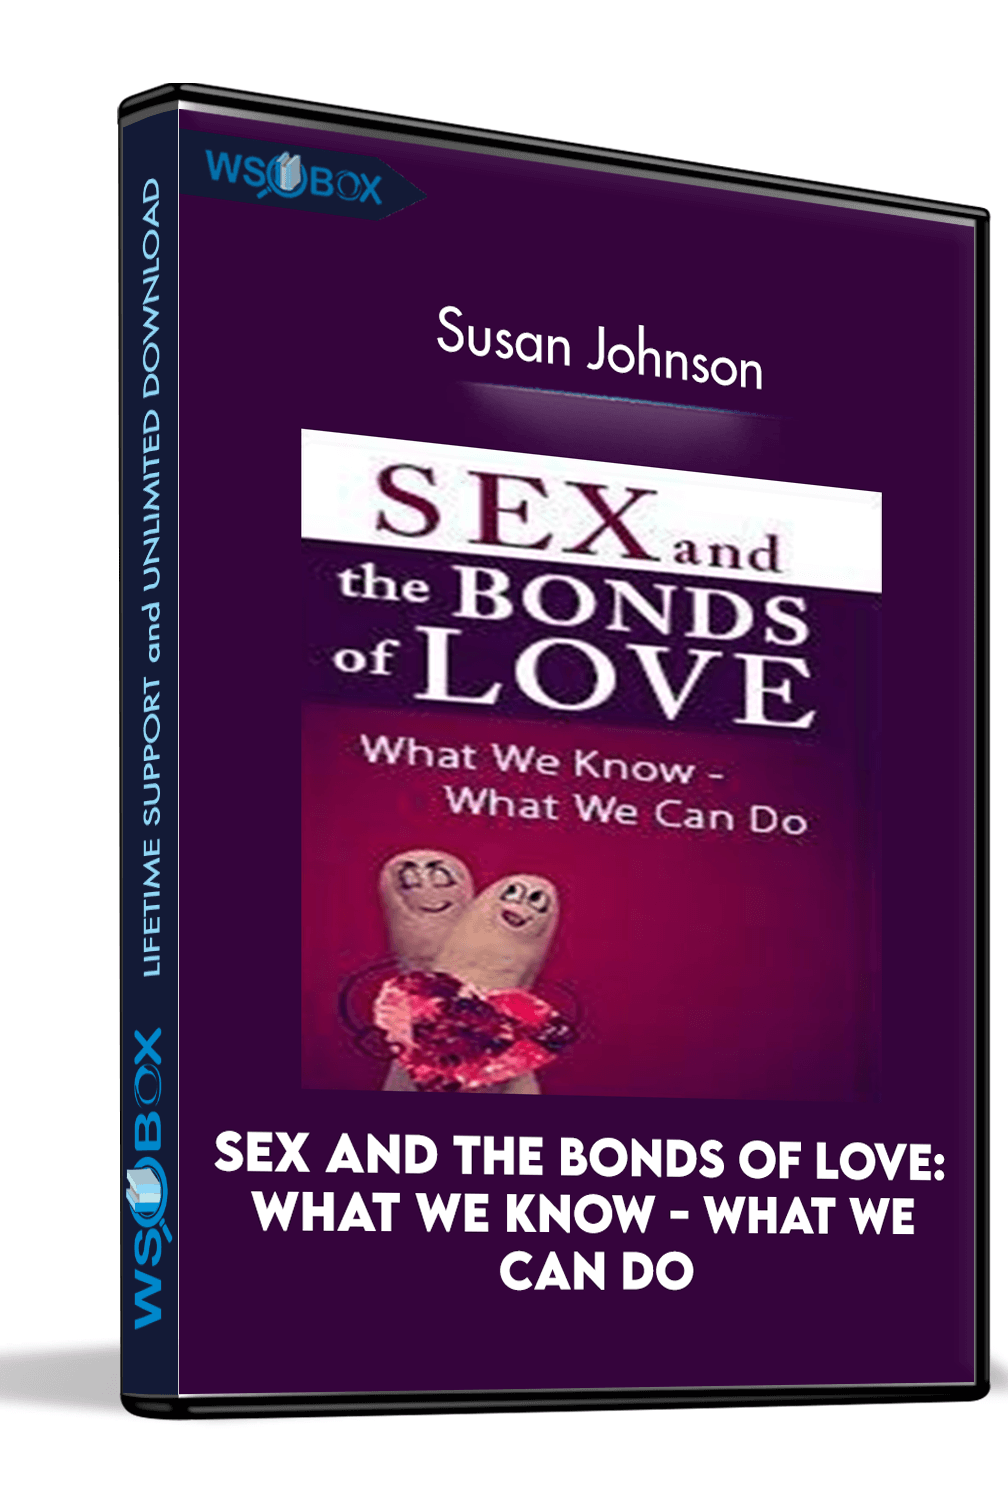 sex-and-the-bonds-of-love-what-we-know-what-we-can-do-with-dr-sue-johnson-susan-johnson